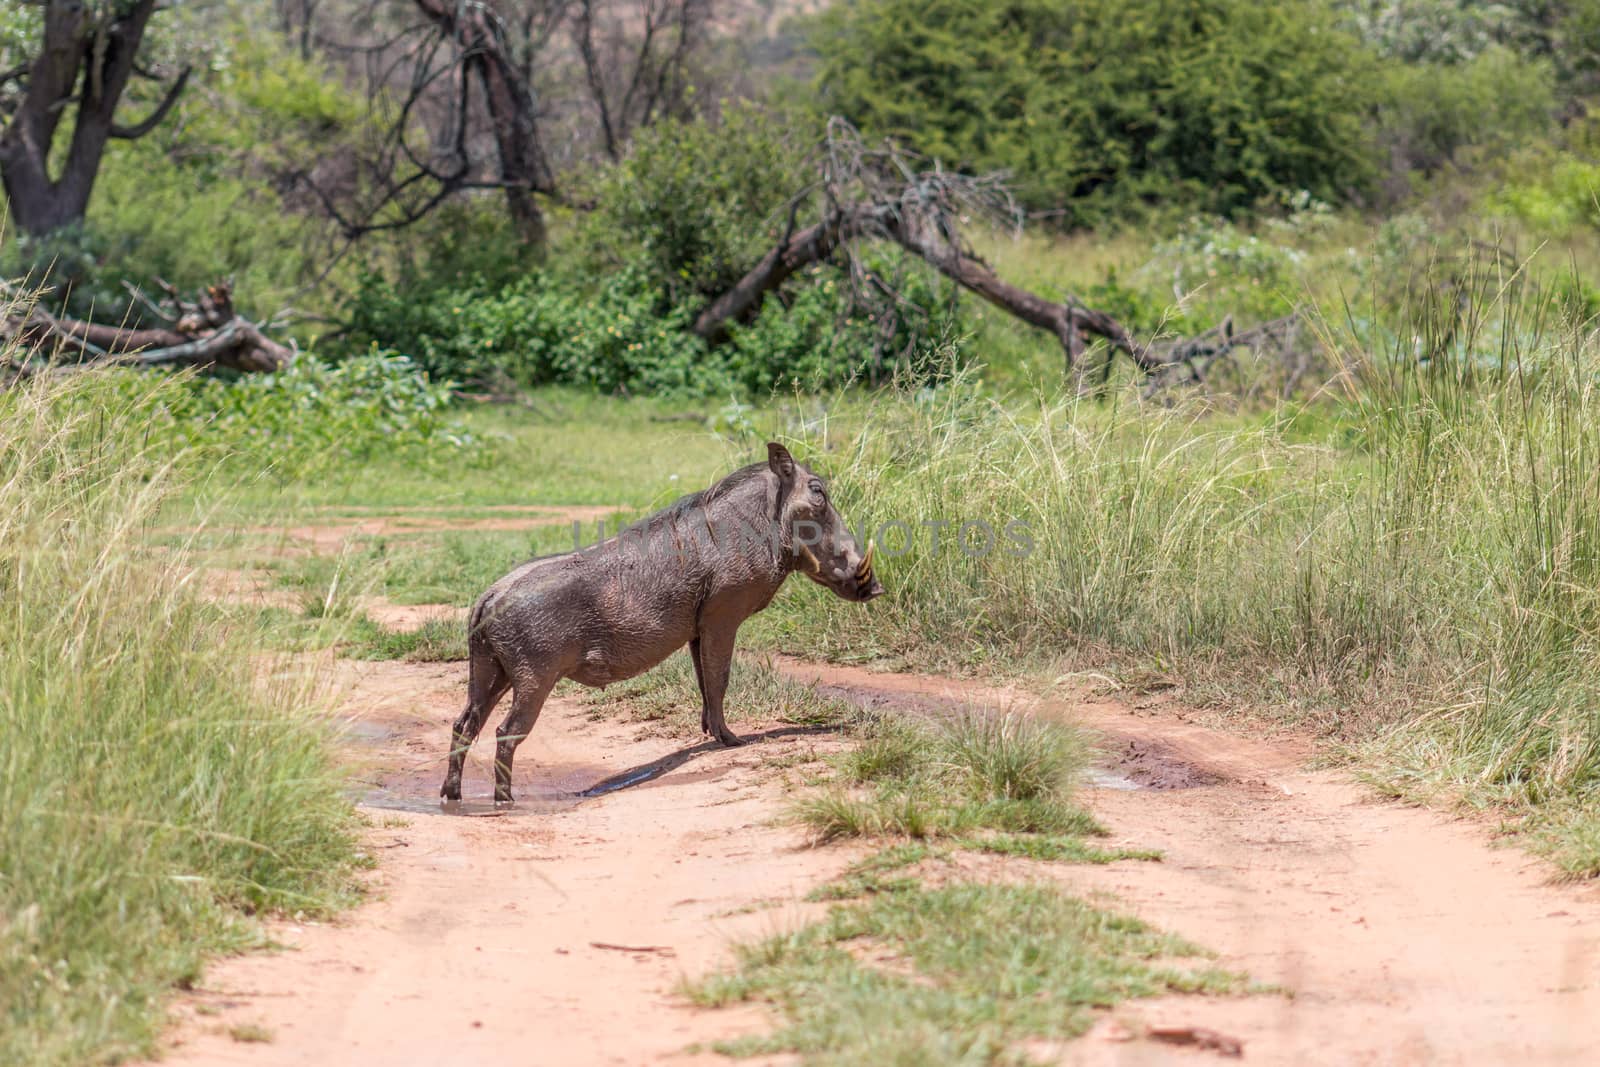 Common warthog standing in the middle of a dirt road